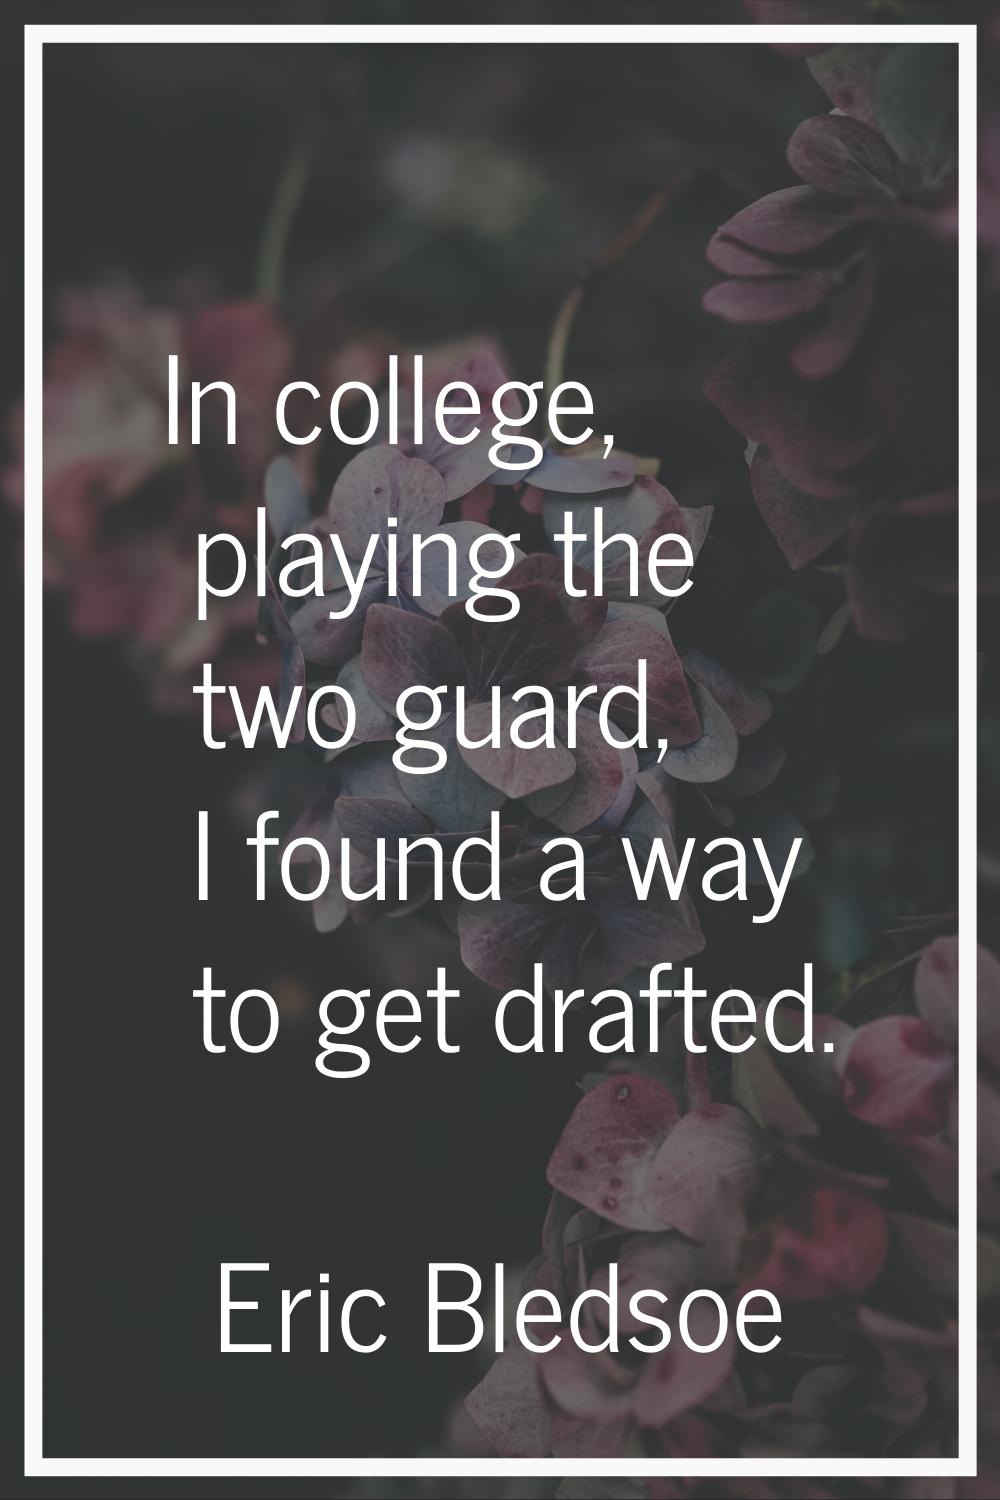 In college, playing the two guard, I found a way to get drafted.